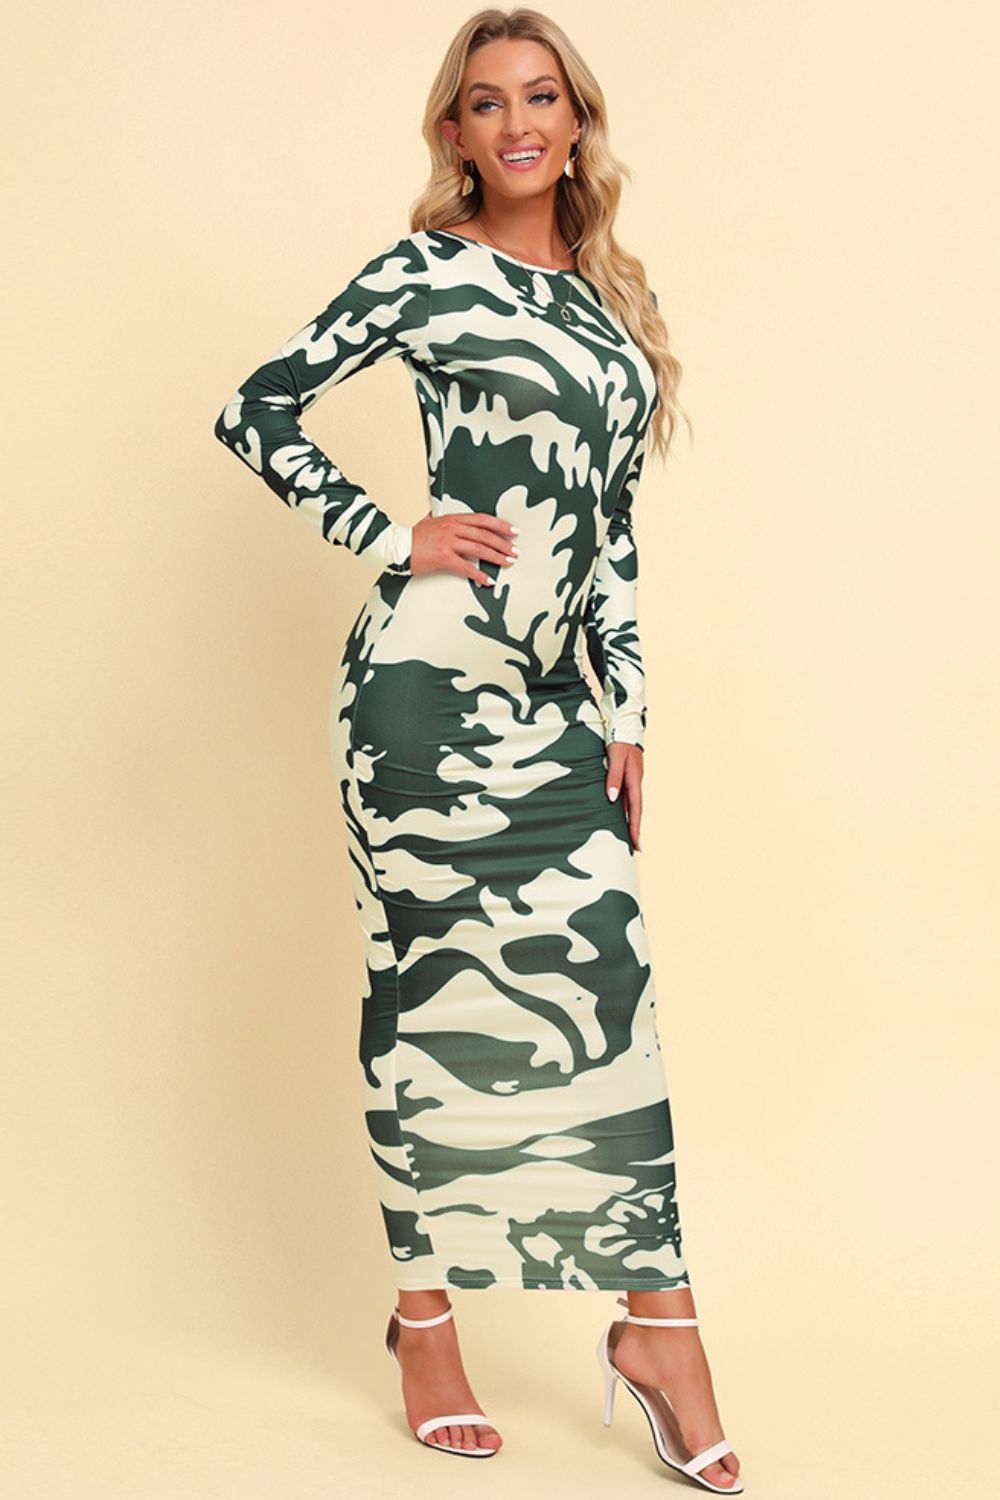 Wheat Printed Backless Long Sleeve Maxi Dress Clothes